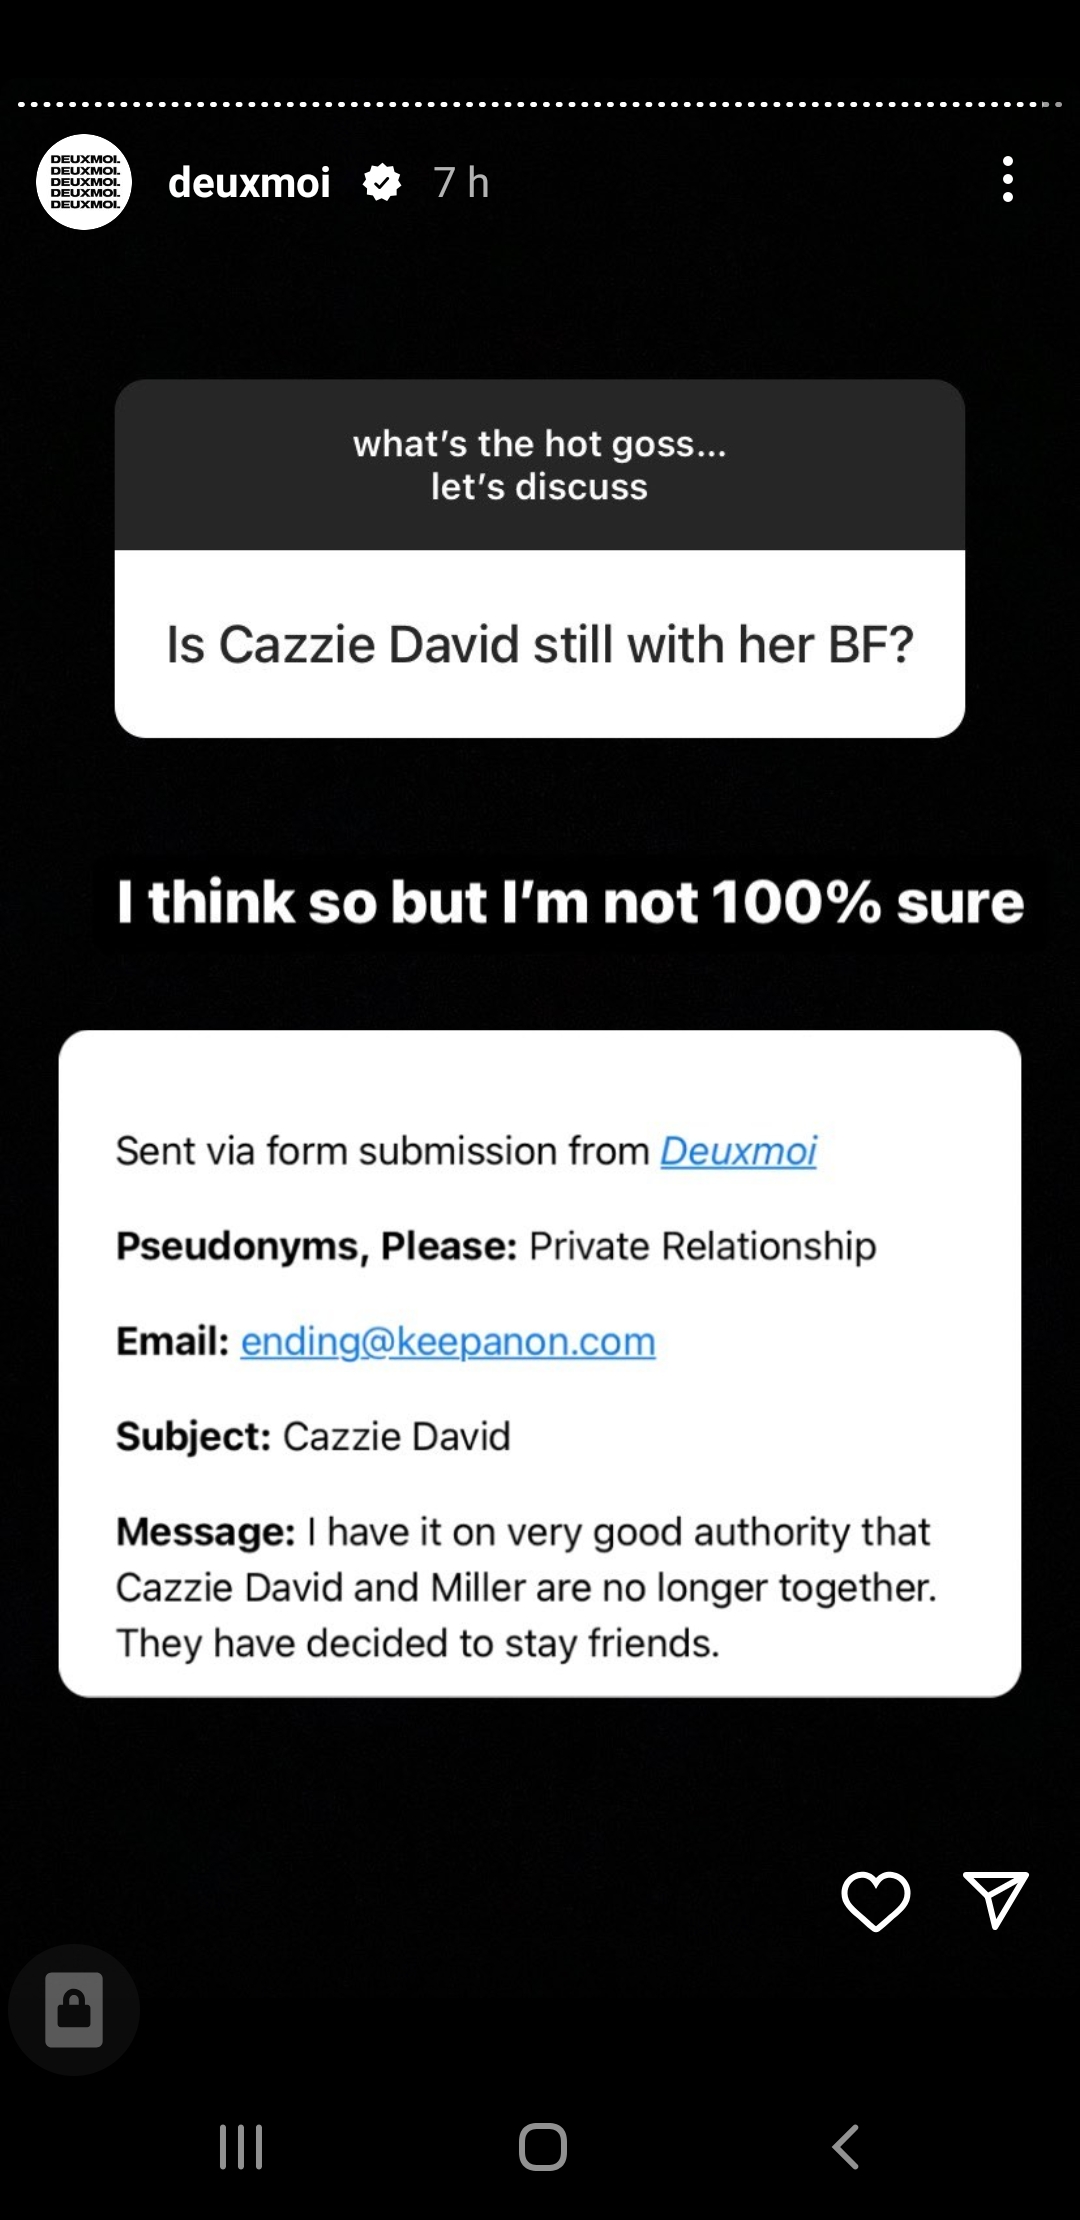 An anonymous tipster claimed that Cazzie David and Miller McCormick are no longer together.